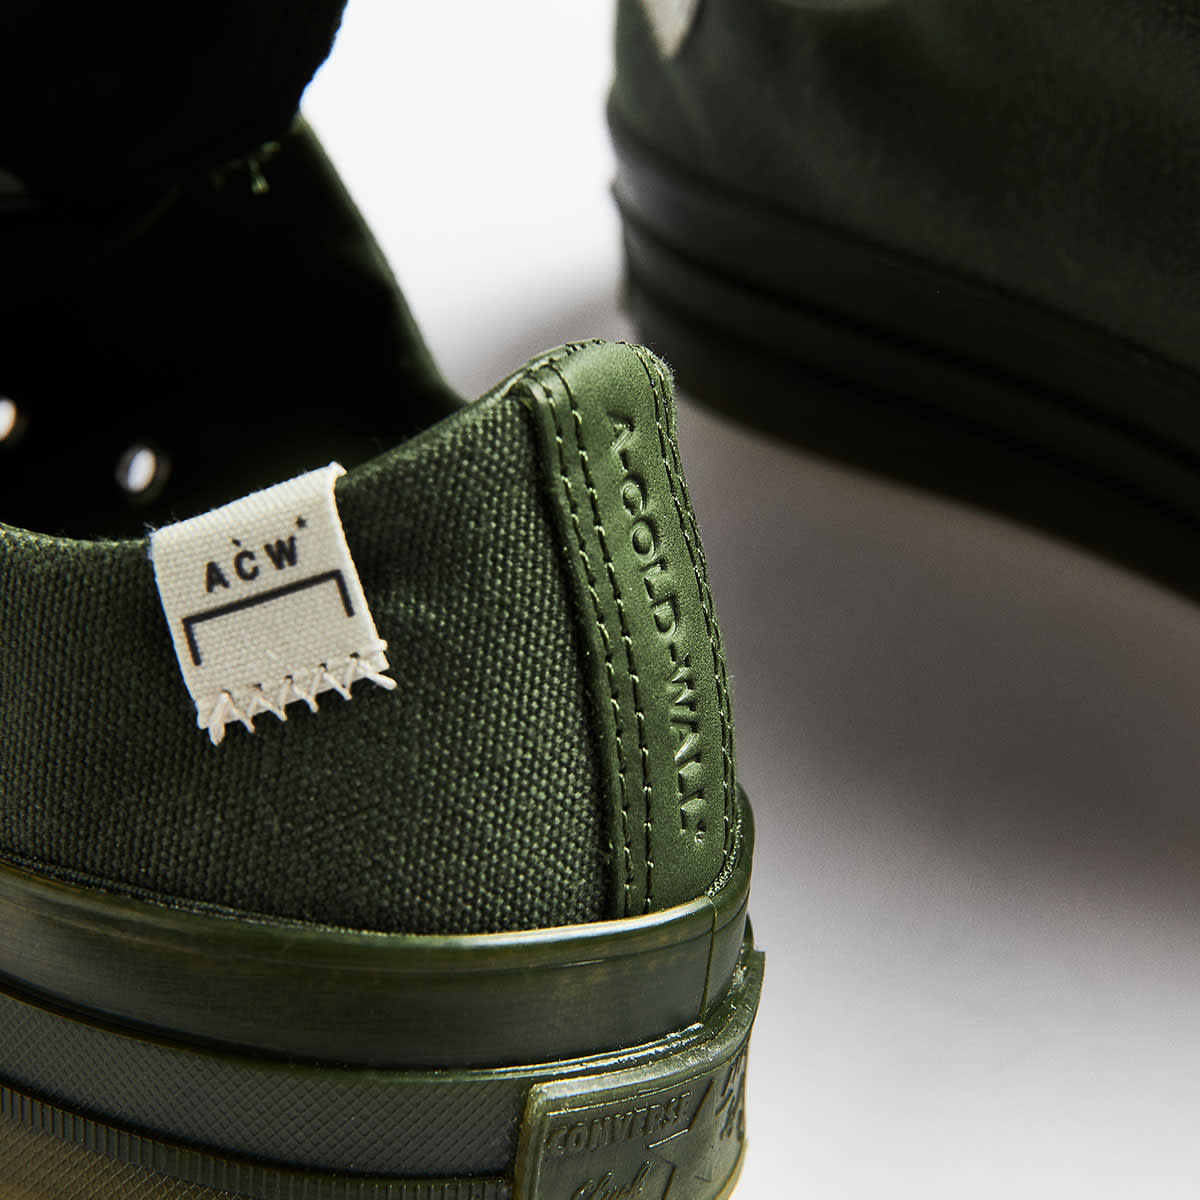 Converse x A-Cold-Wall Chuck Taylor 1970s Ox (Green) | END. Launches